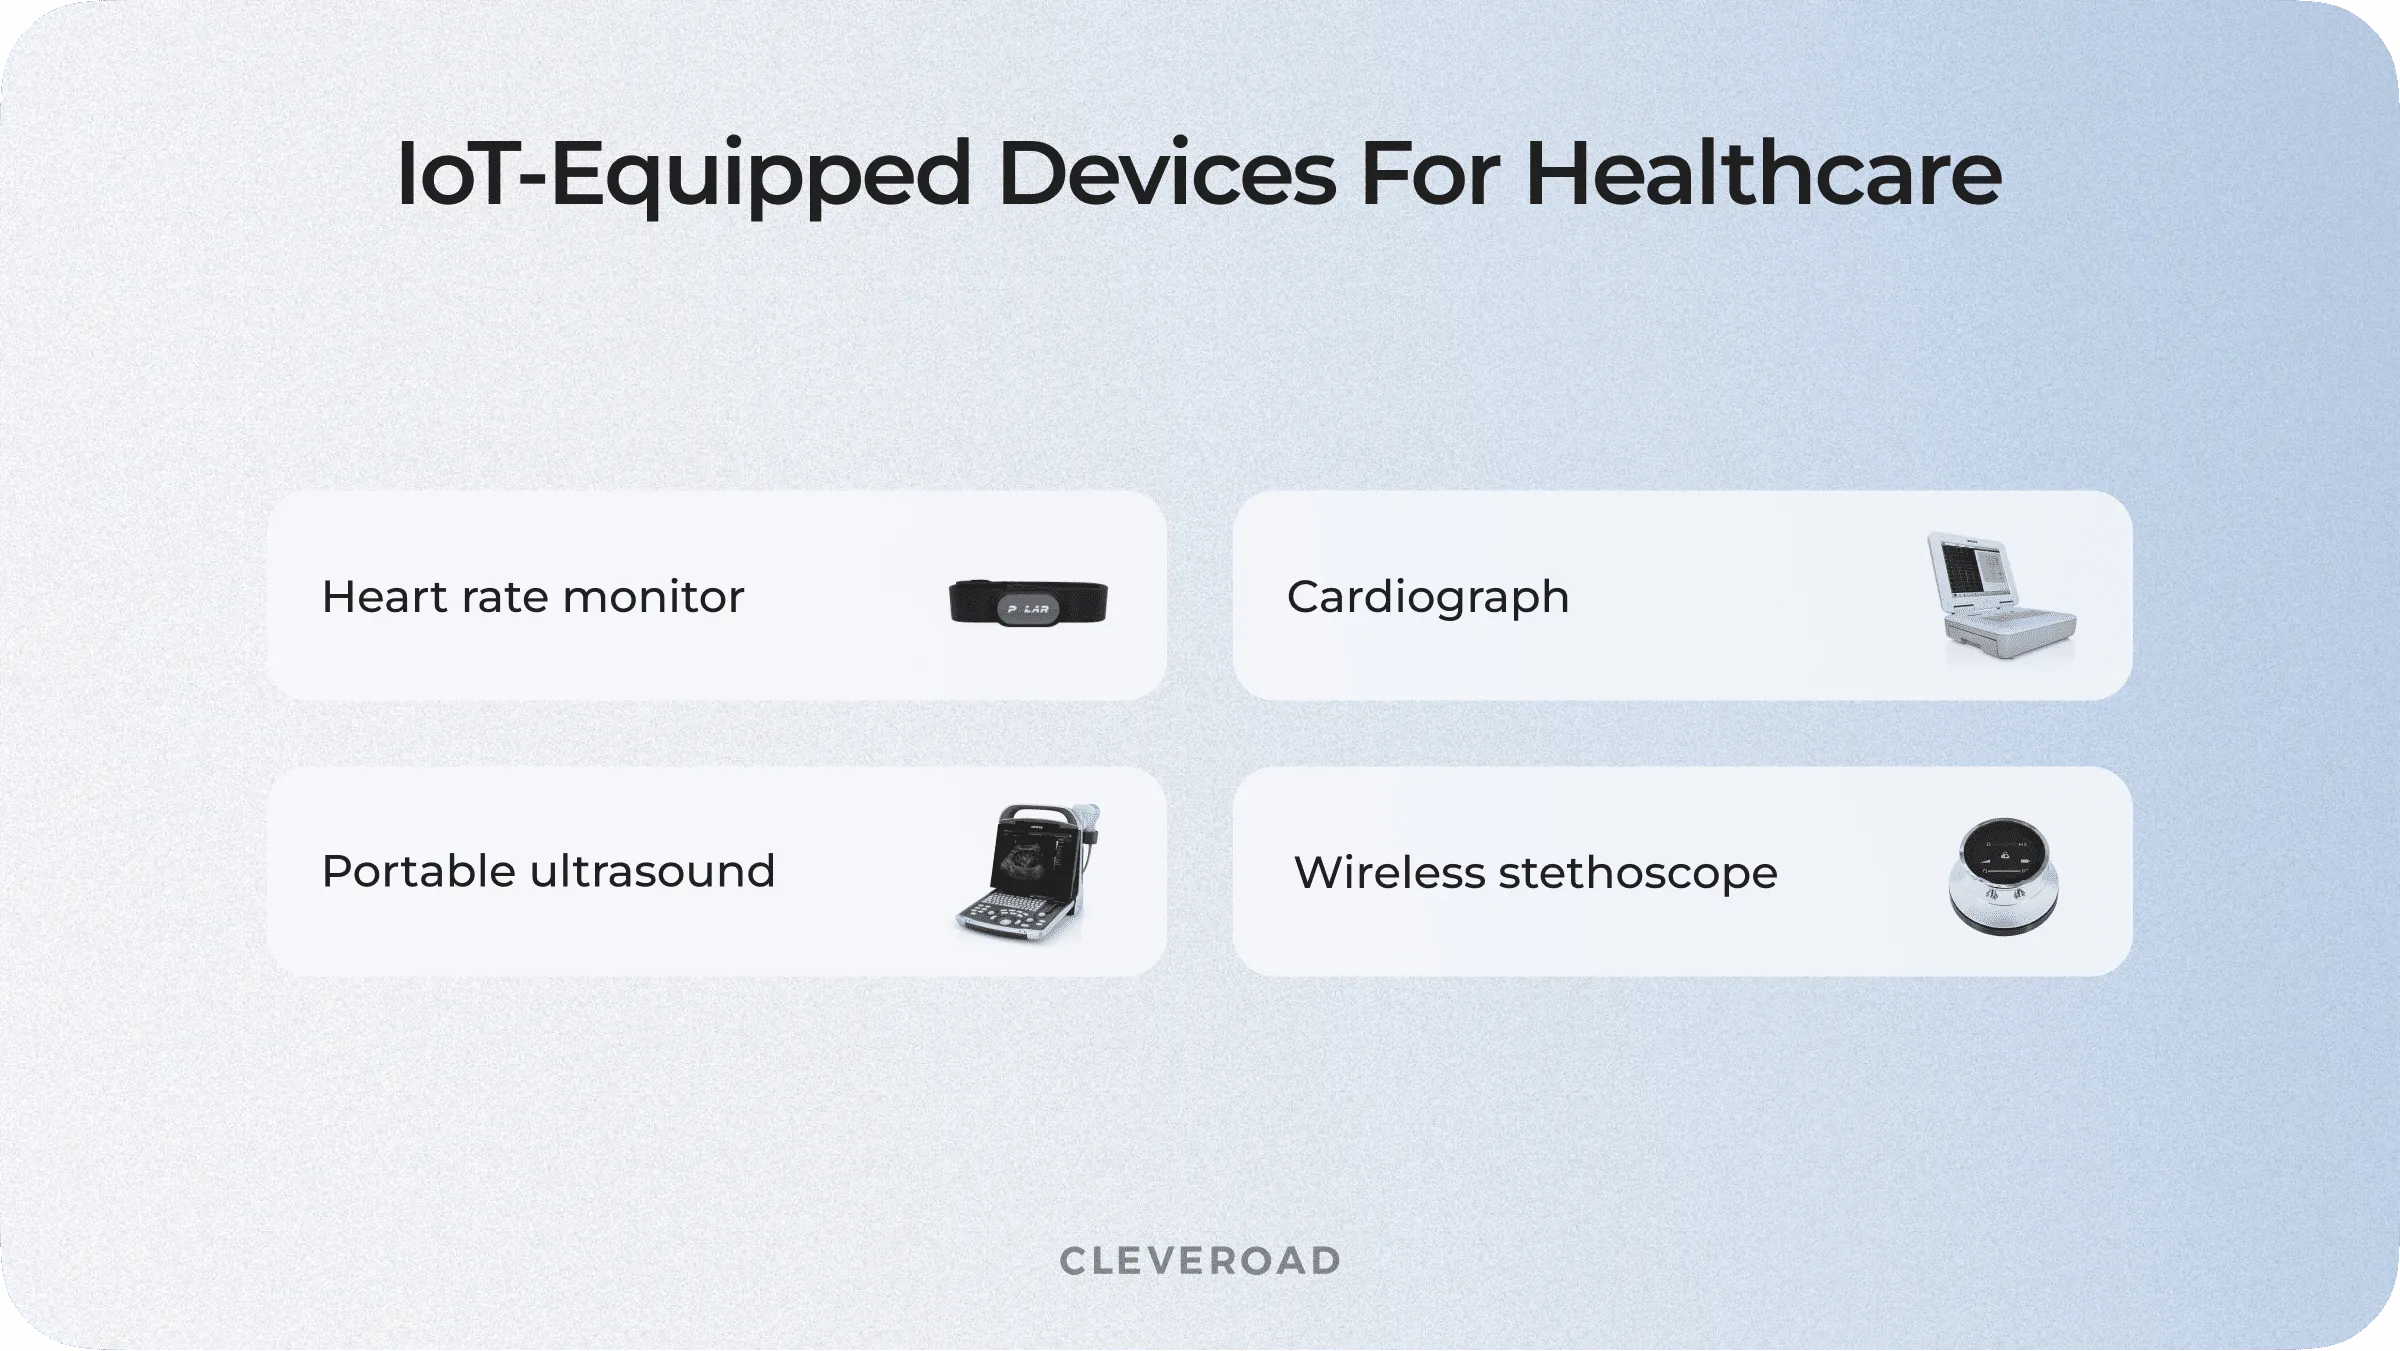 IoT in healthcare examples